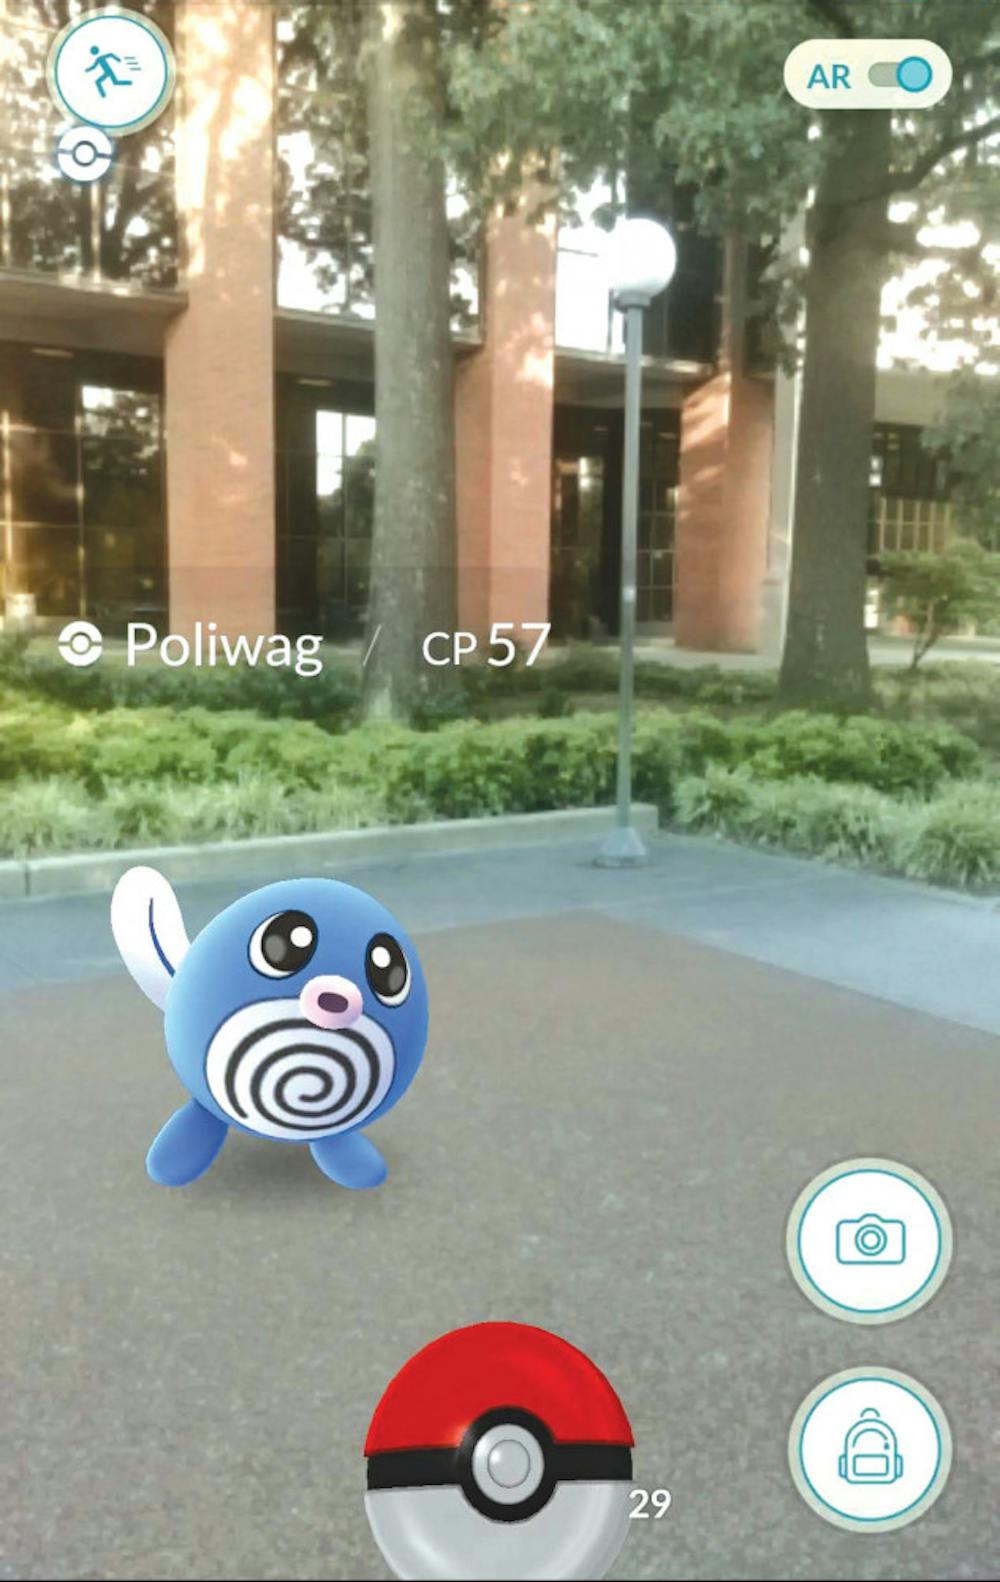 <p>Screenshot of a person playing Pokémon Go! Students across campus caught Pokémon to level up in the game.&nbsp;</p>